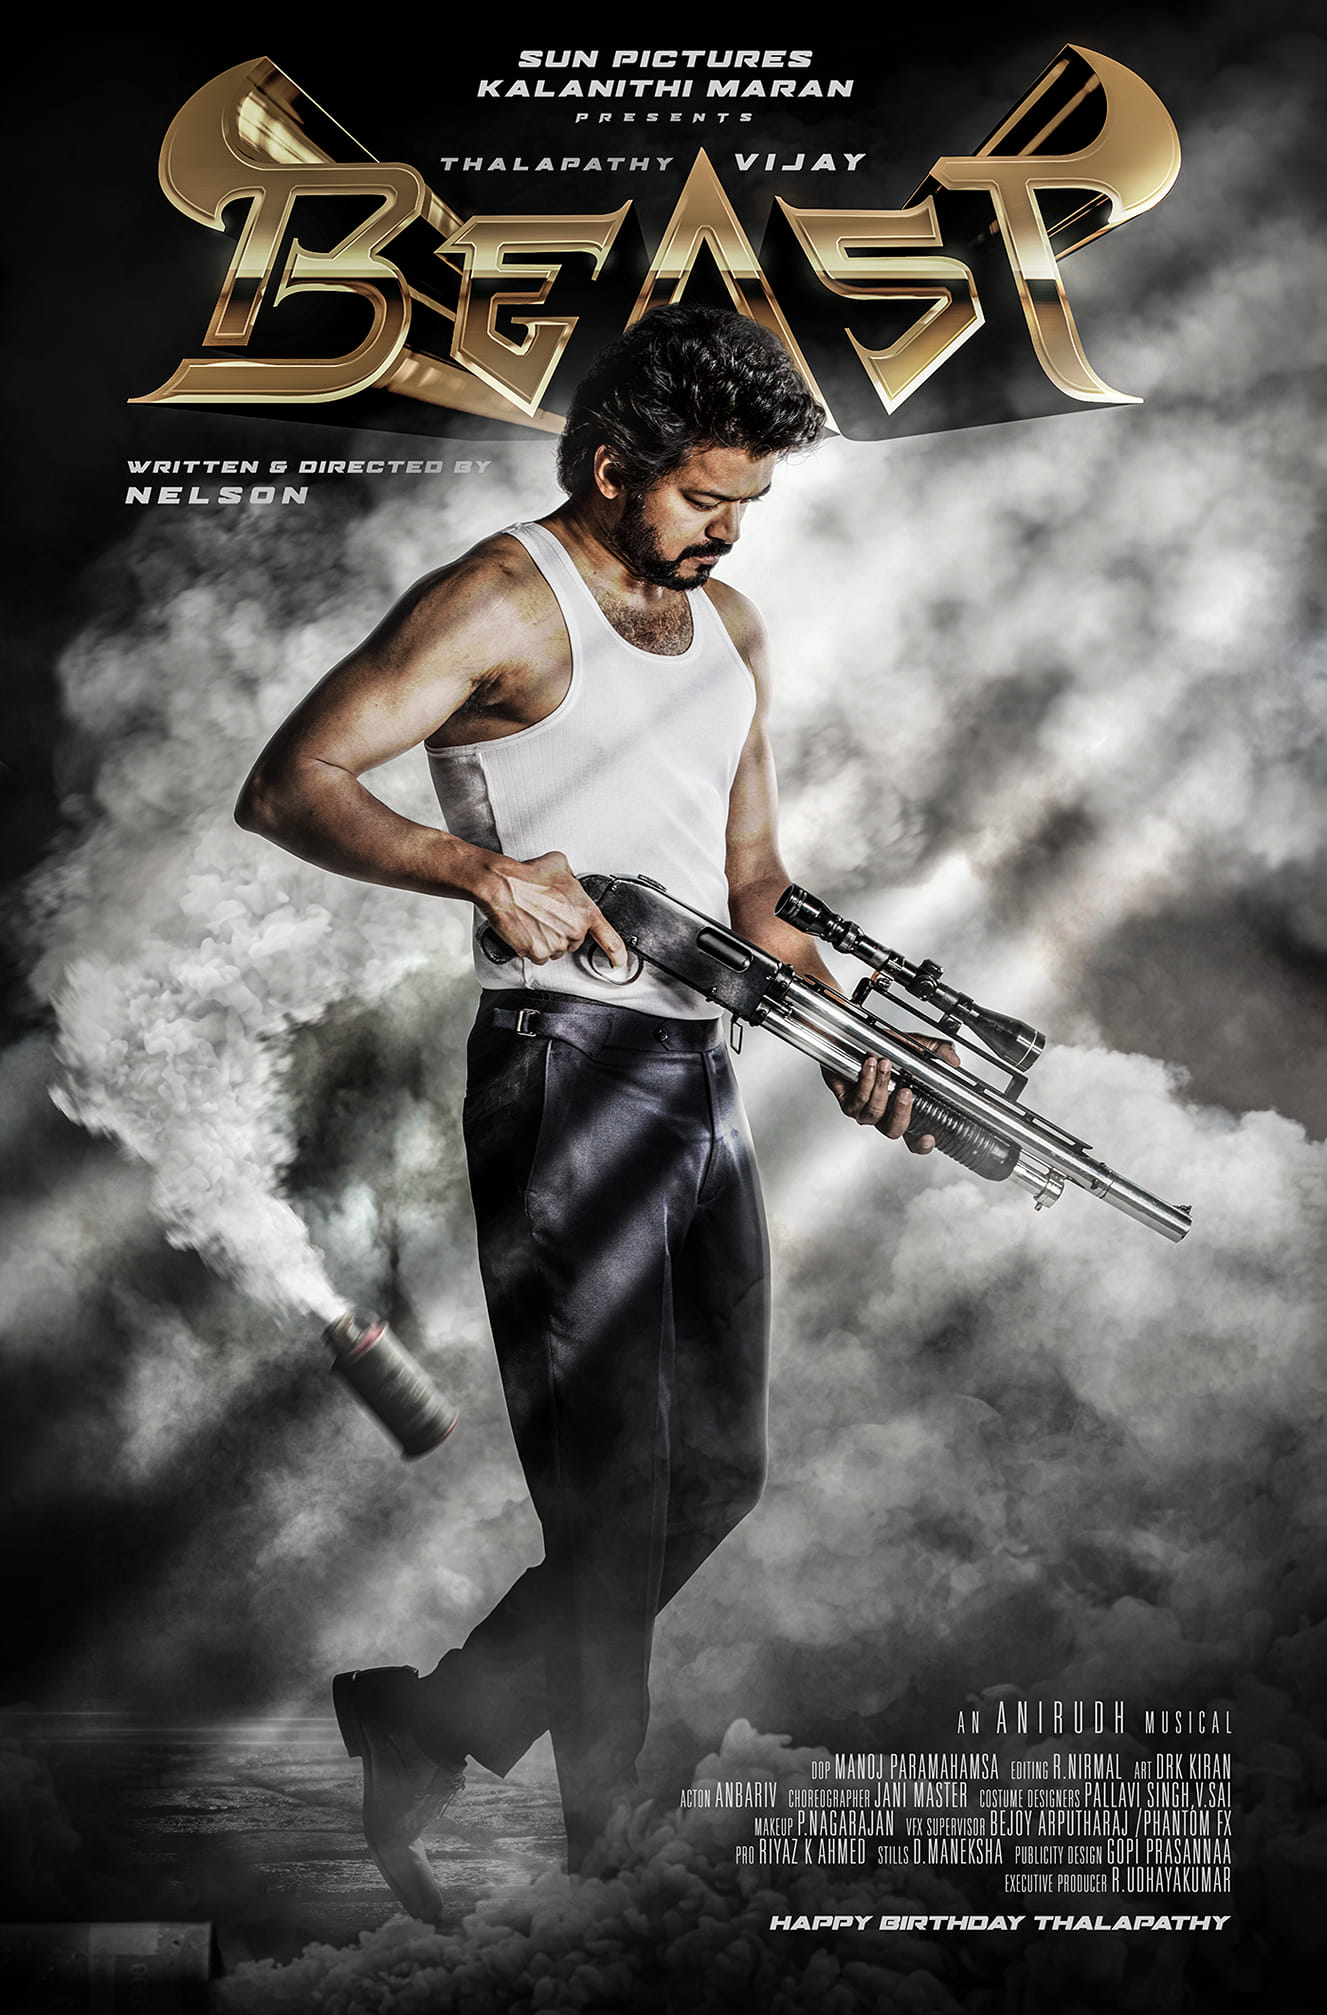 BeastSecondLook Thalapathy vijay Sun pictures Nelson